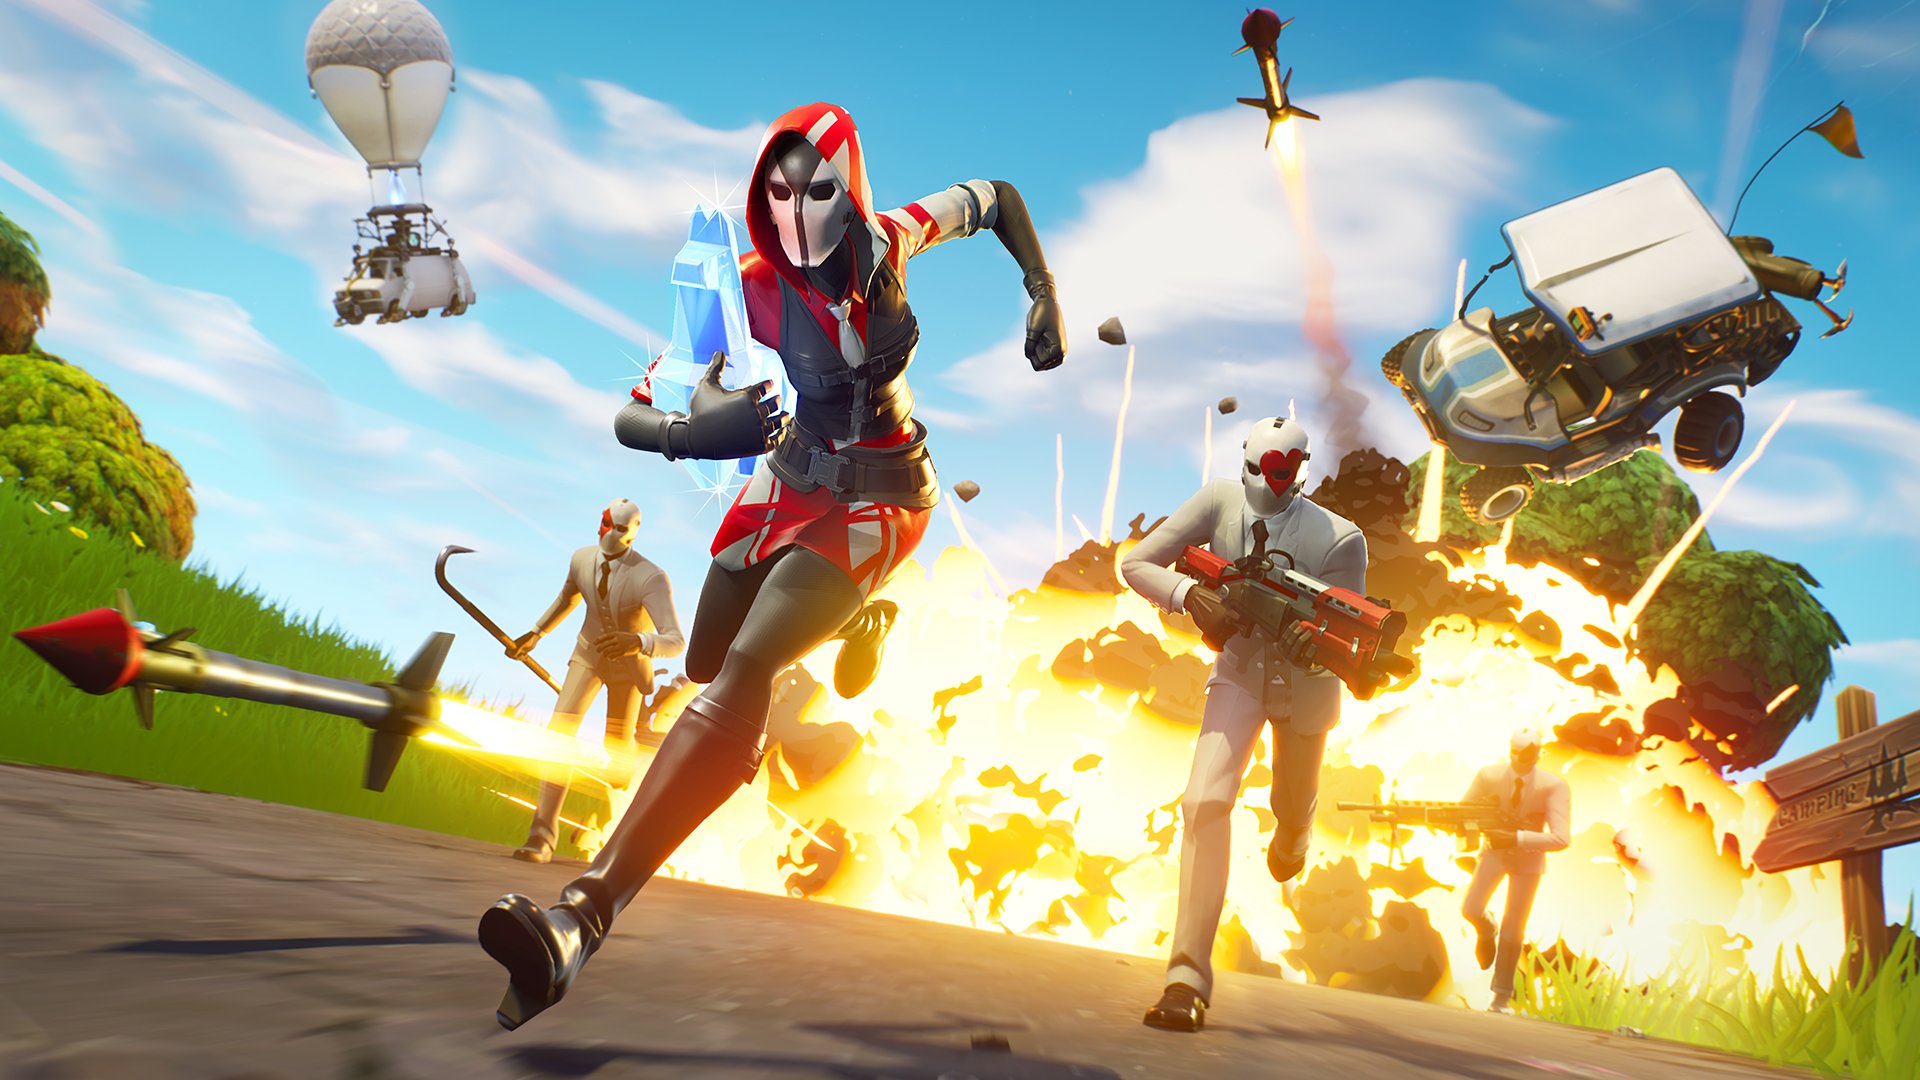 Sometimes a quick restart can fix your lag issues in Fortnite: Battle Royale.